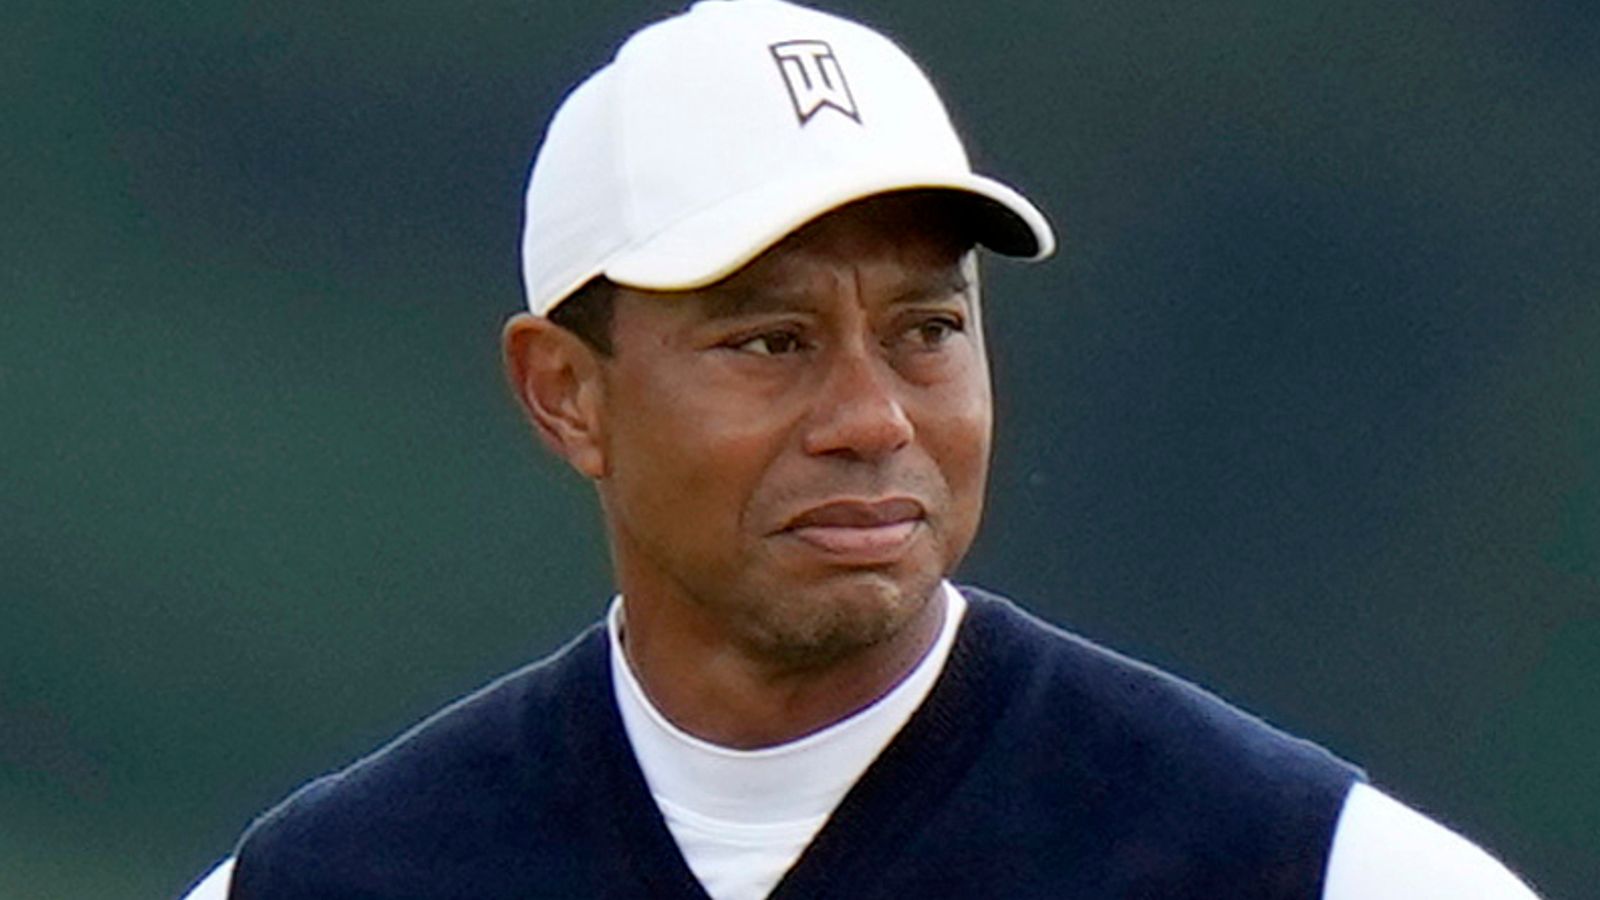 Tiger Woods admits there is an added injury risk playing with son Charlie at PNC Championship – but he doesn’t care